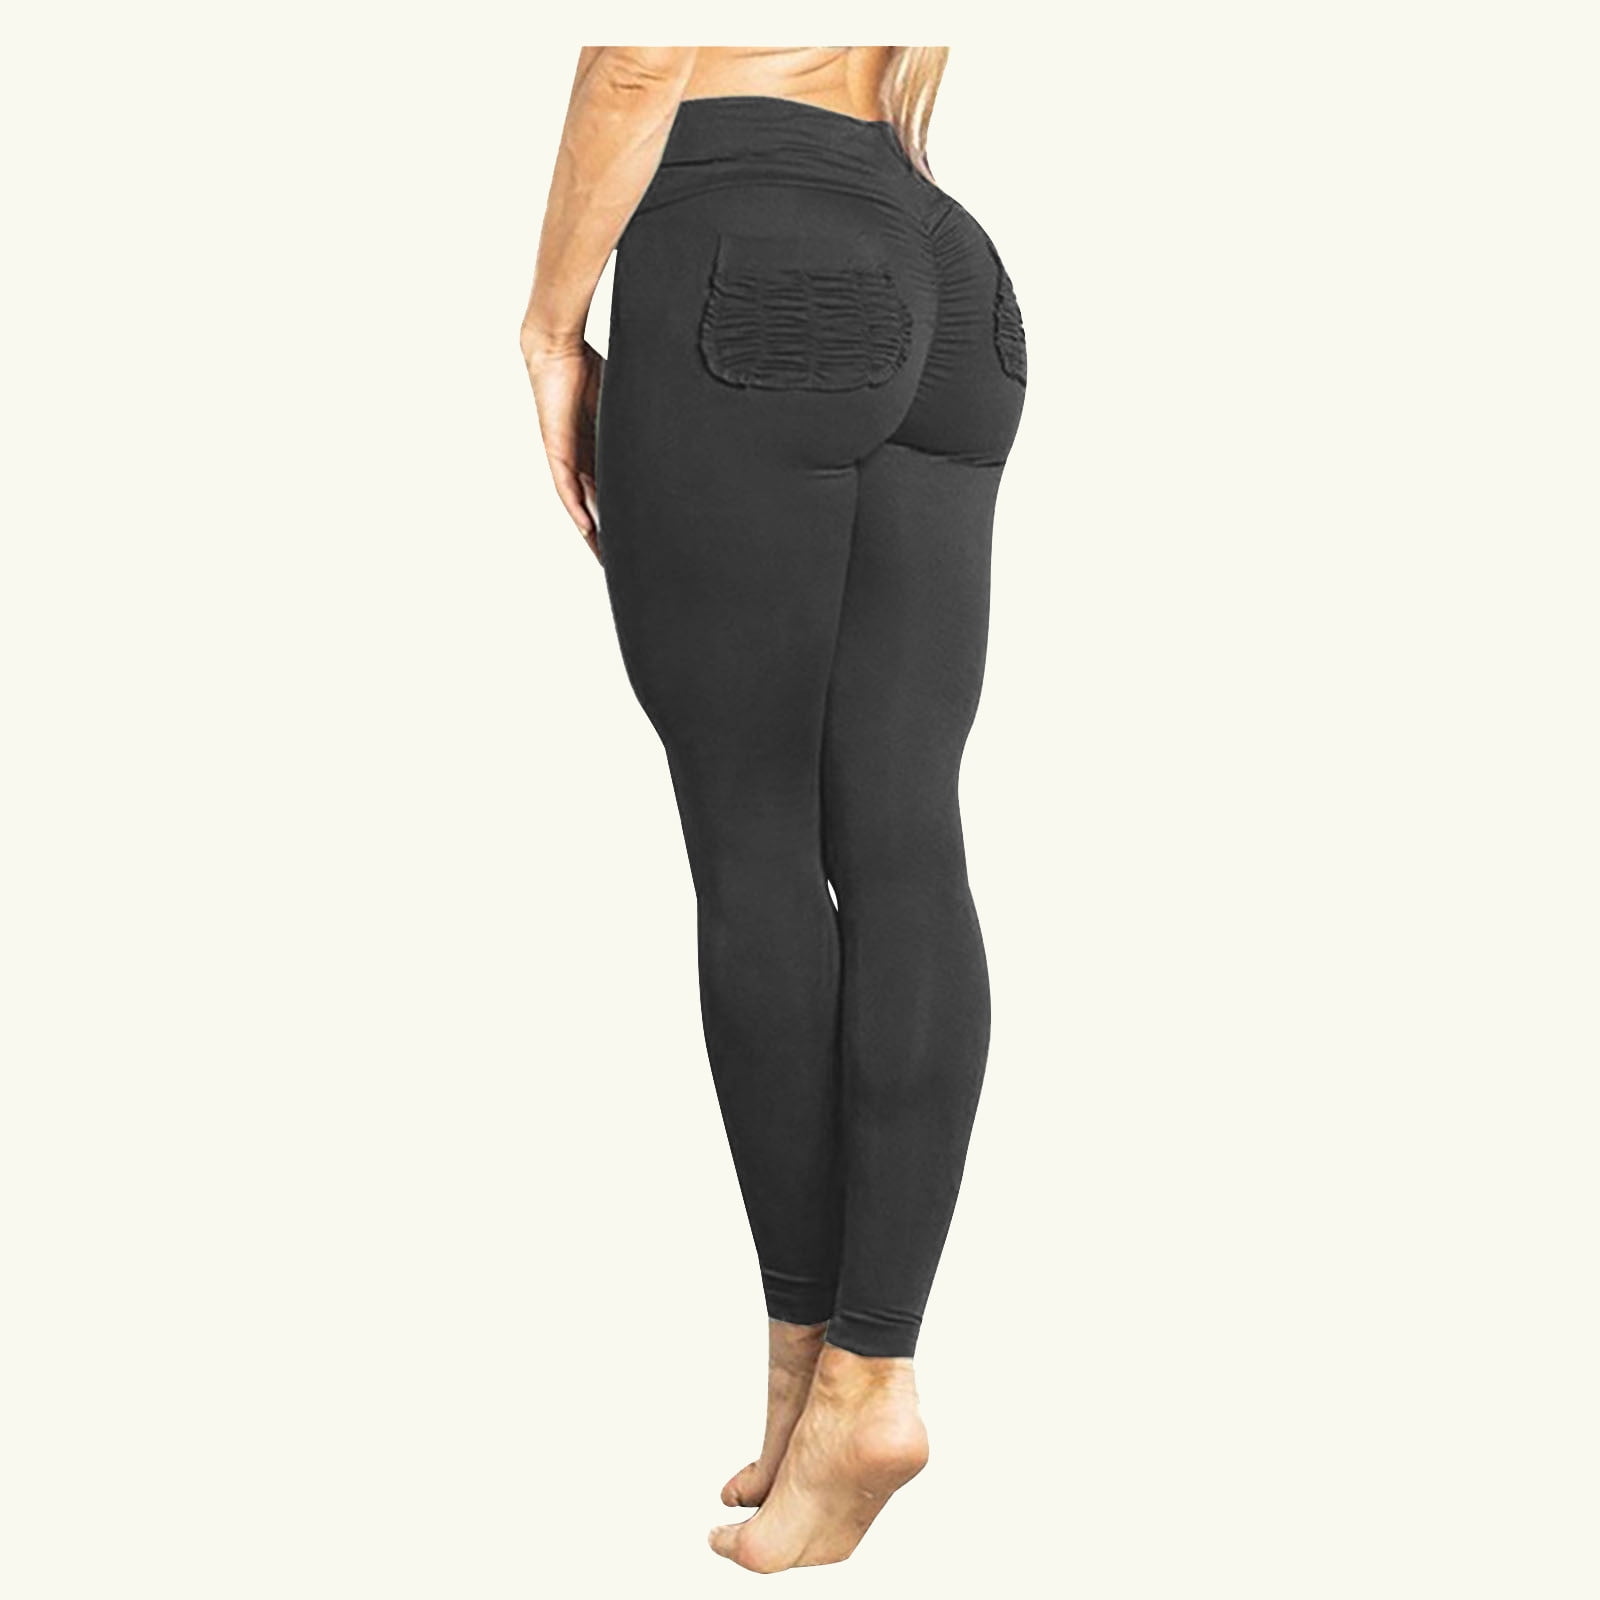 Babysbule Womens Yoga Pants Clearance Women Fitness Exercise Stretch High  Waist Skinny Sexy Suckled Pocket Yoga Pants